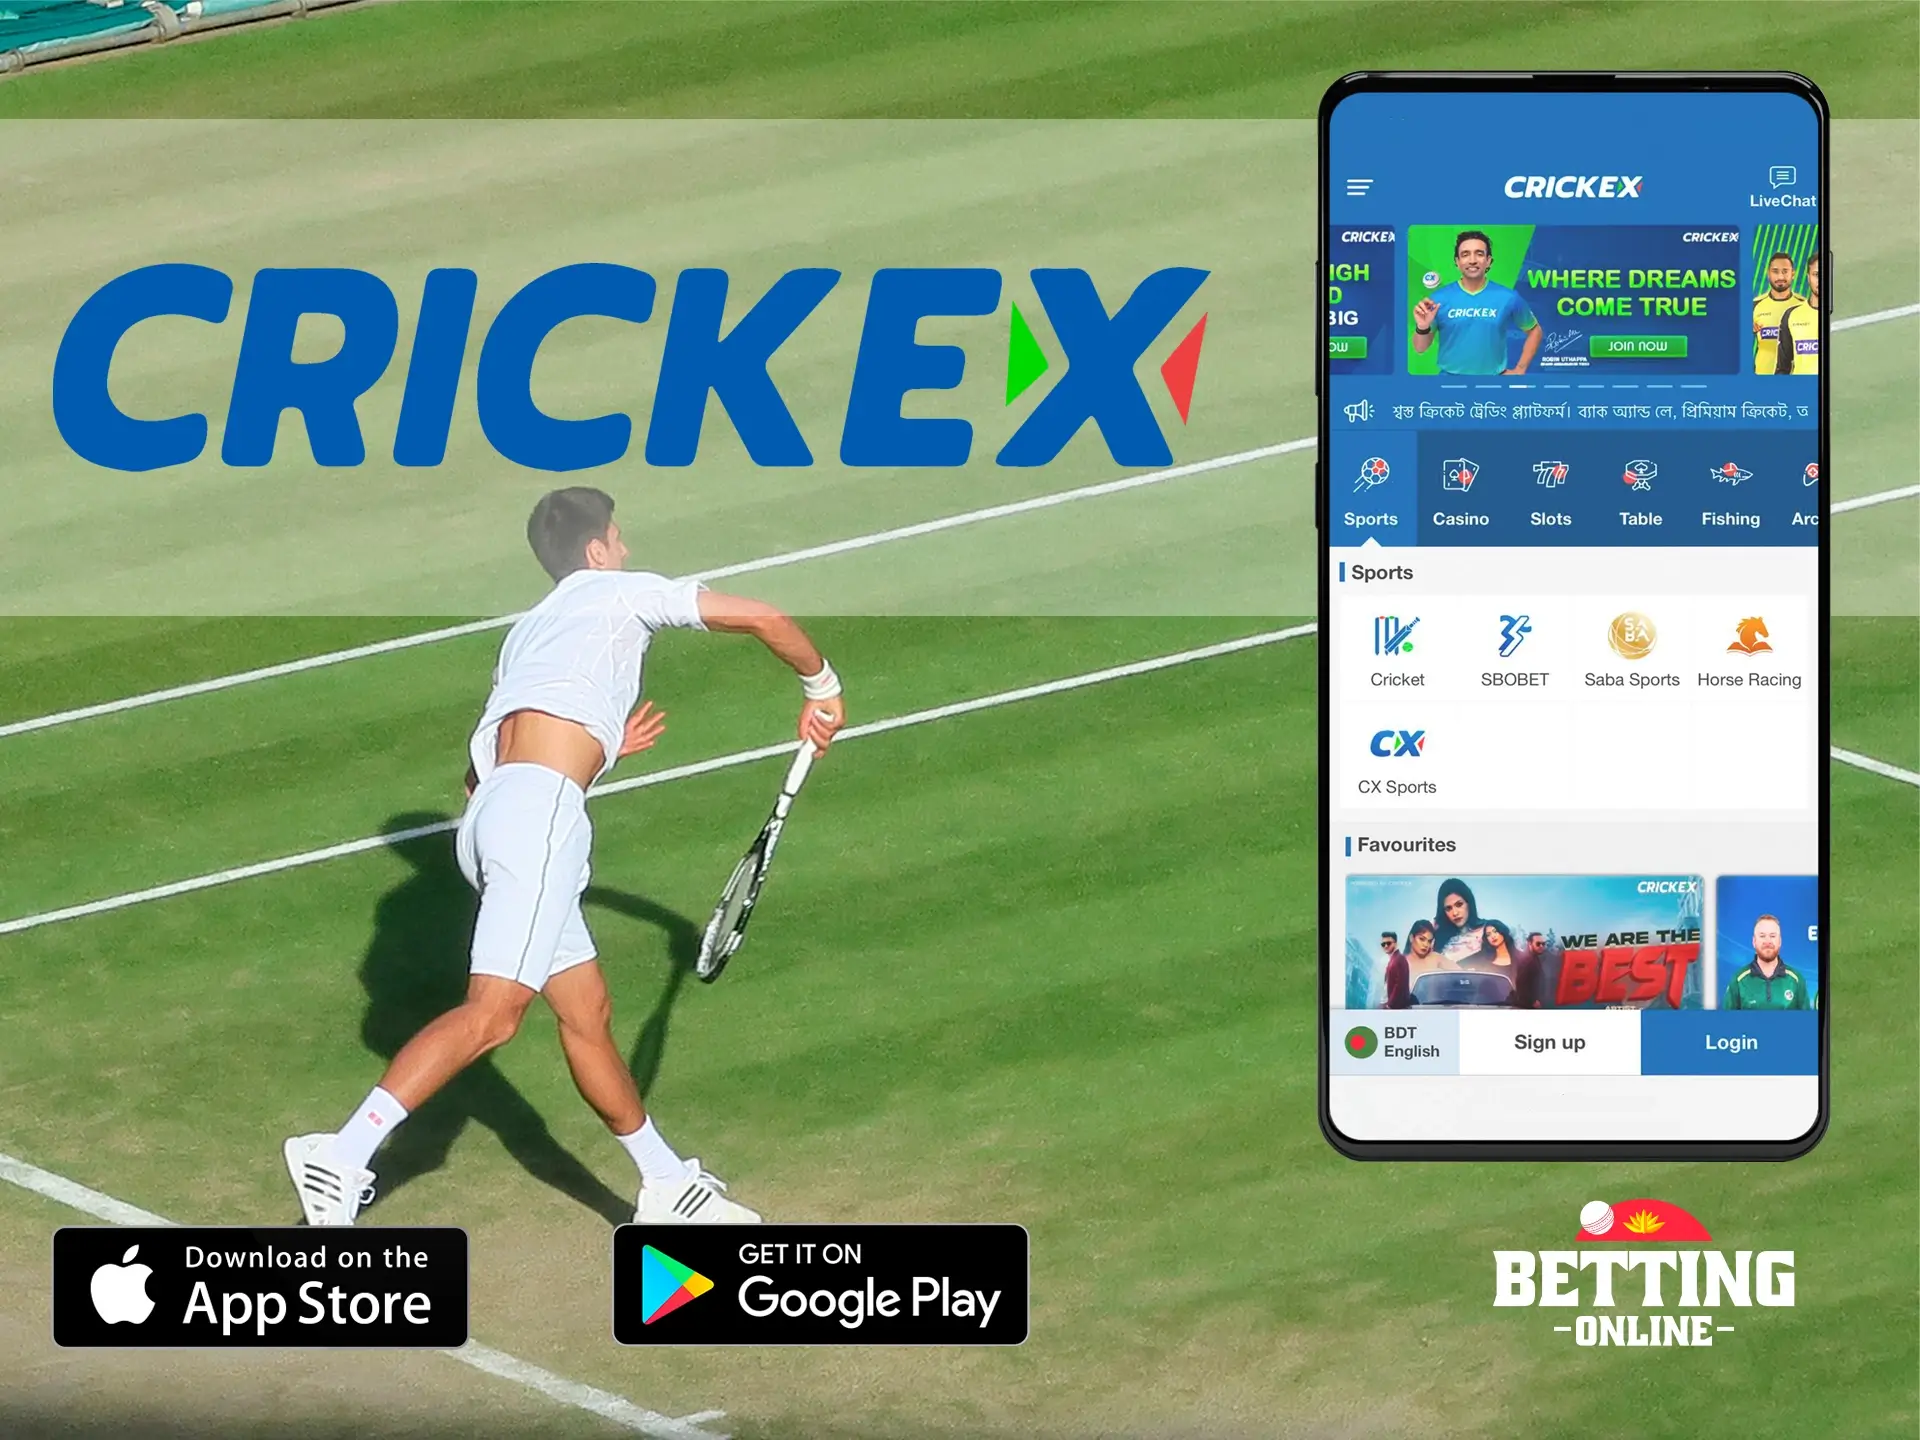 Popular withdrawal and deposit methods as well as live streaming can be found in the Crickex app.